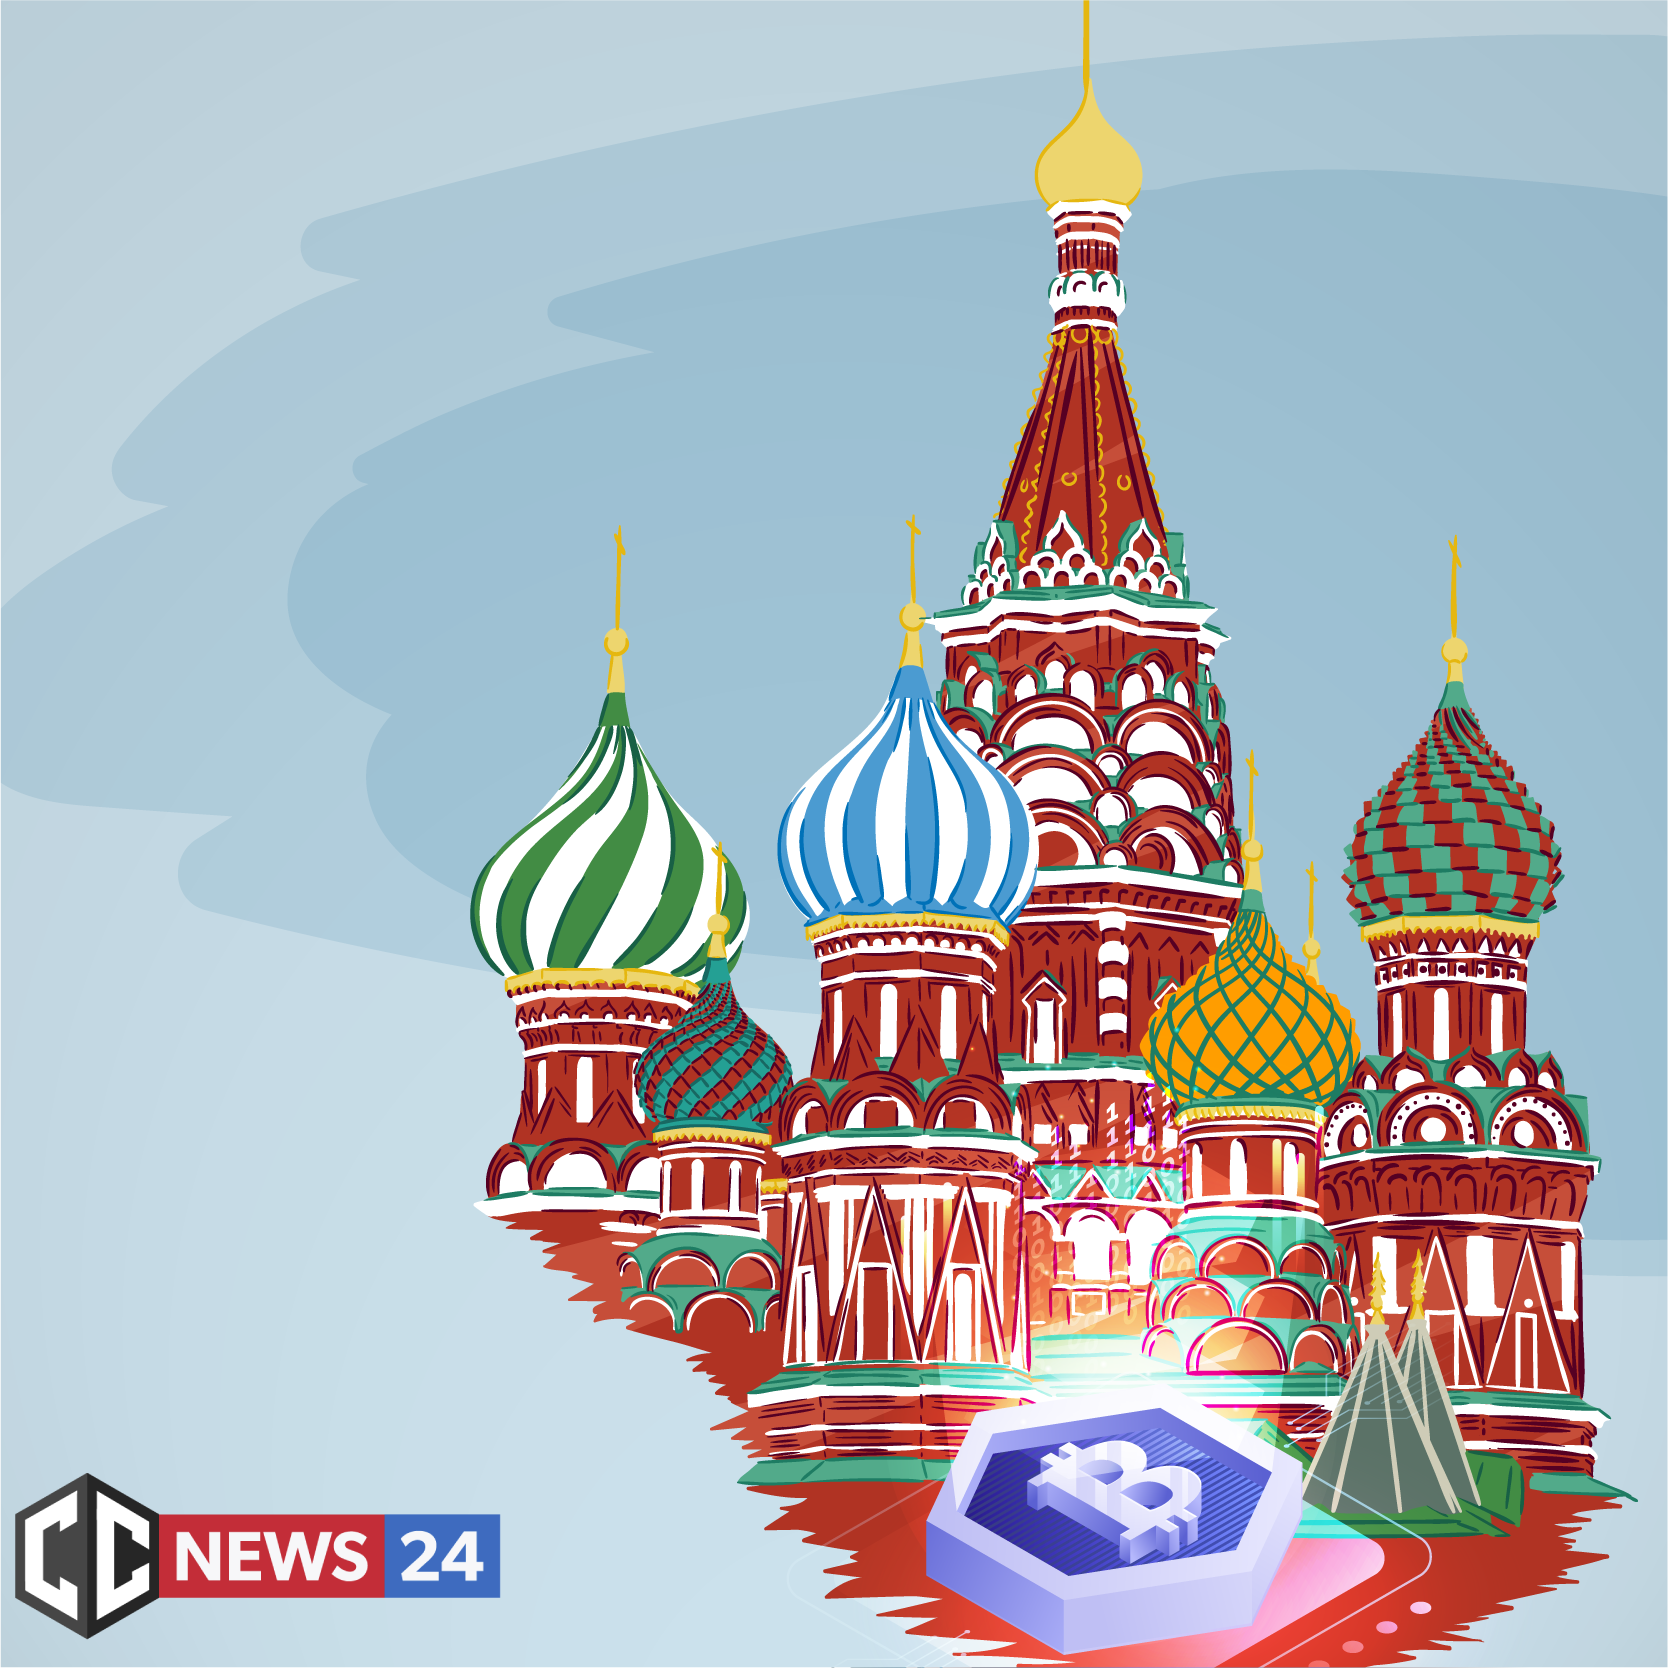 Russia has successfully implemented the Blockchain platform